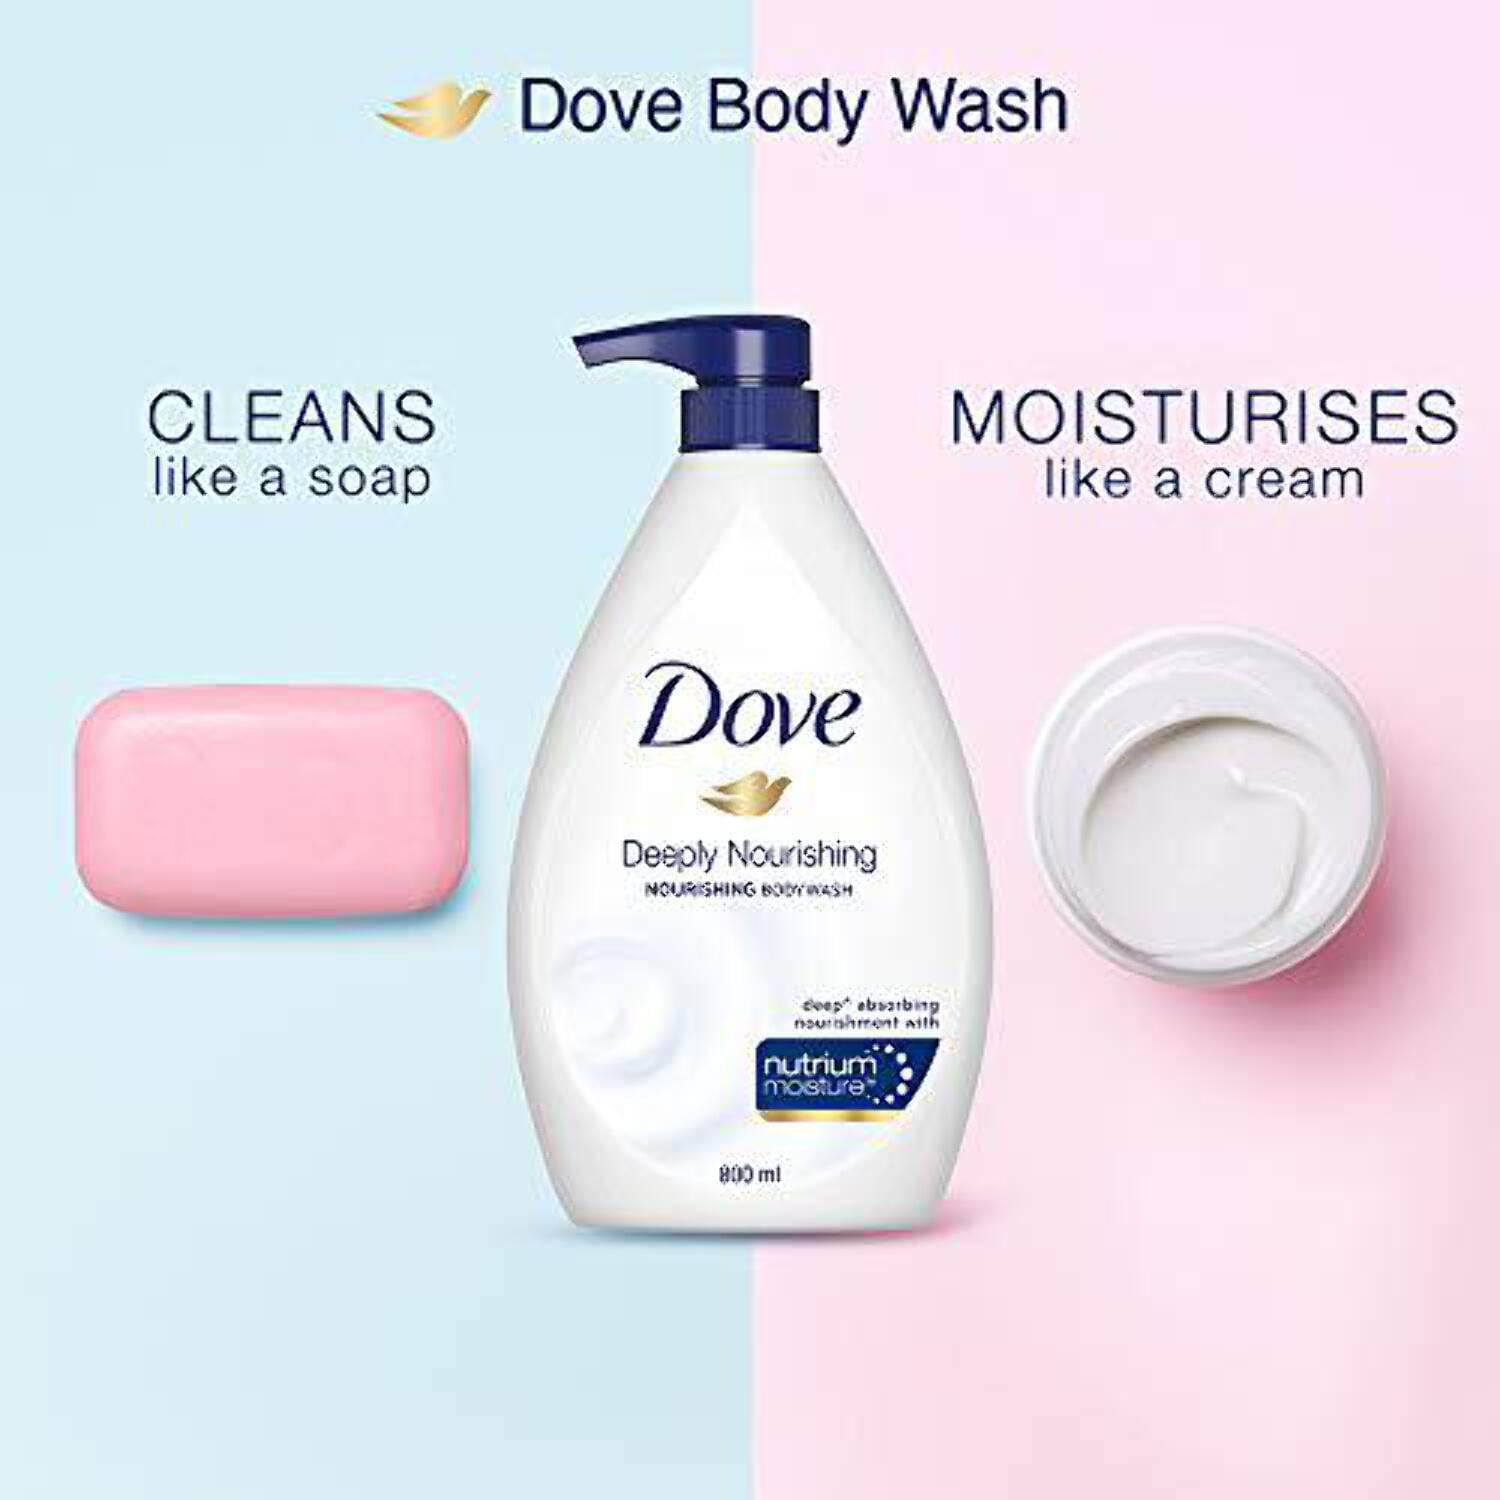 mate Londen College Dove Deeply Nourishing Body Wash, With Exfoliating Beads For Softer,  Smoother Skin, 800 ml - Walmart.com